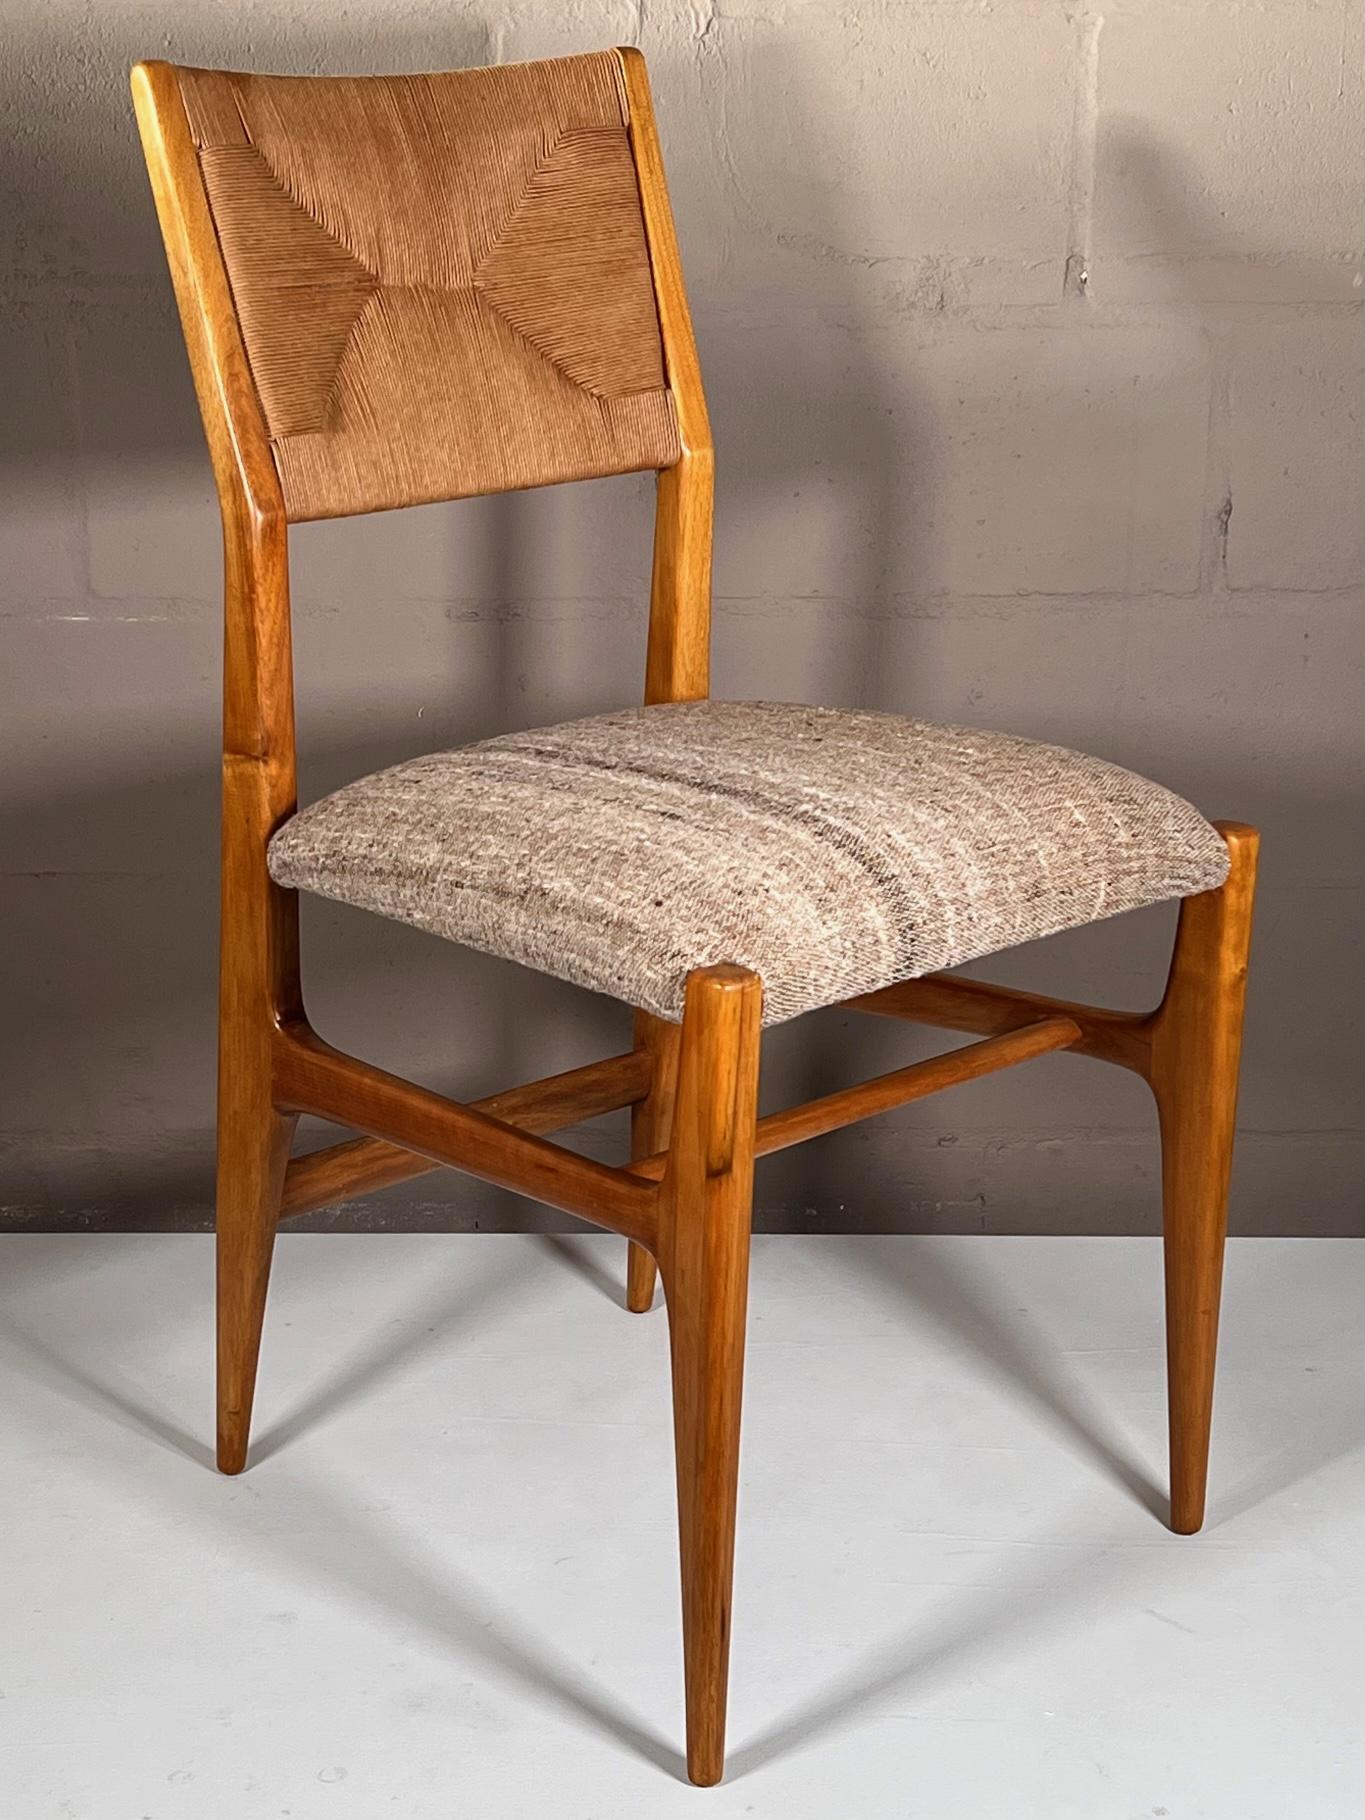 A beautiful, vintage dining/desk/occasional chair by Gio Ponti for Singer&Sons, ca' 1950's. Restored with wool seats by Larsen fabric, papercord backs. These chairs are classics that will never go out of style. A total of two (2) available.